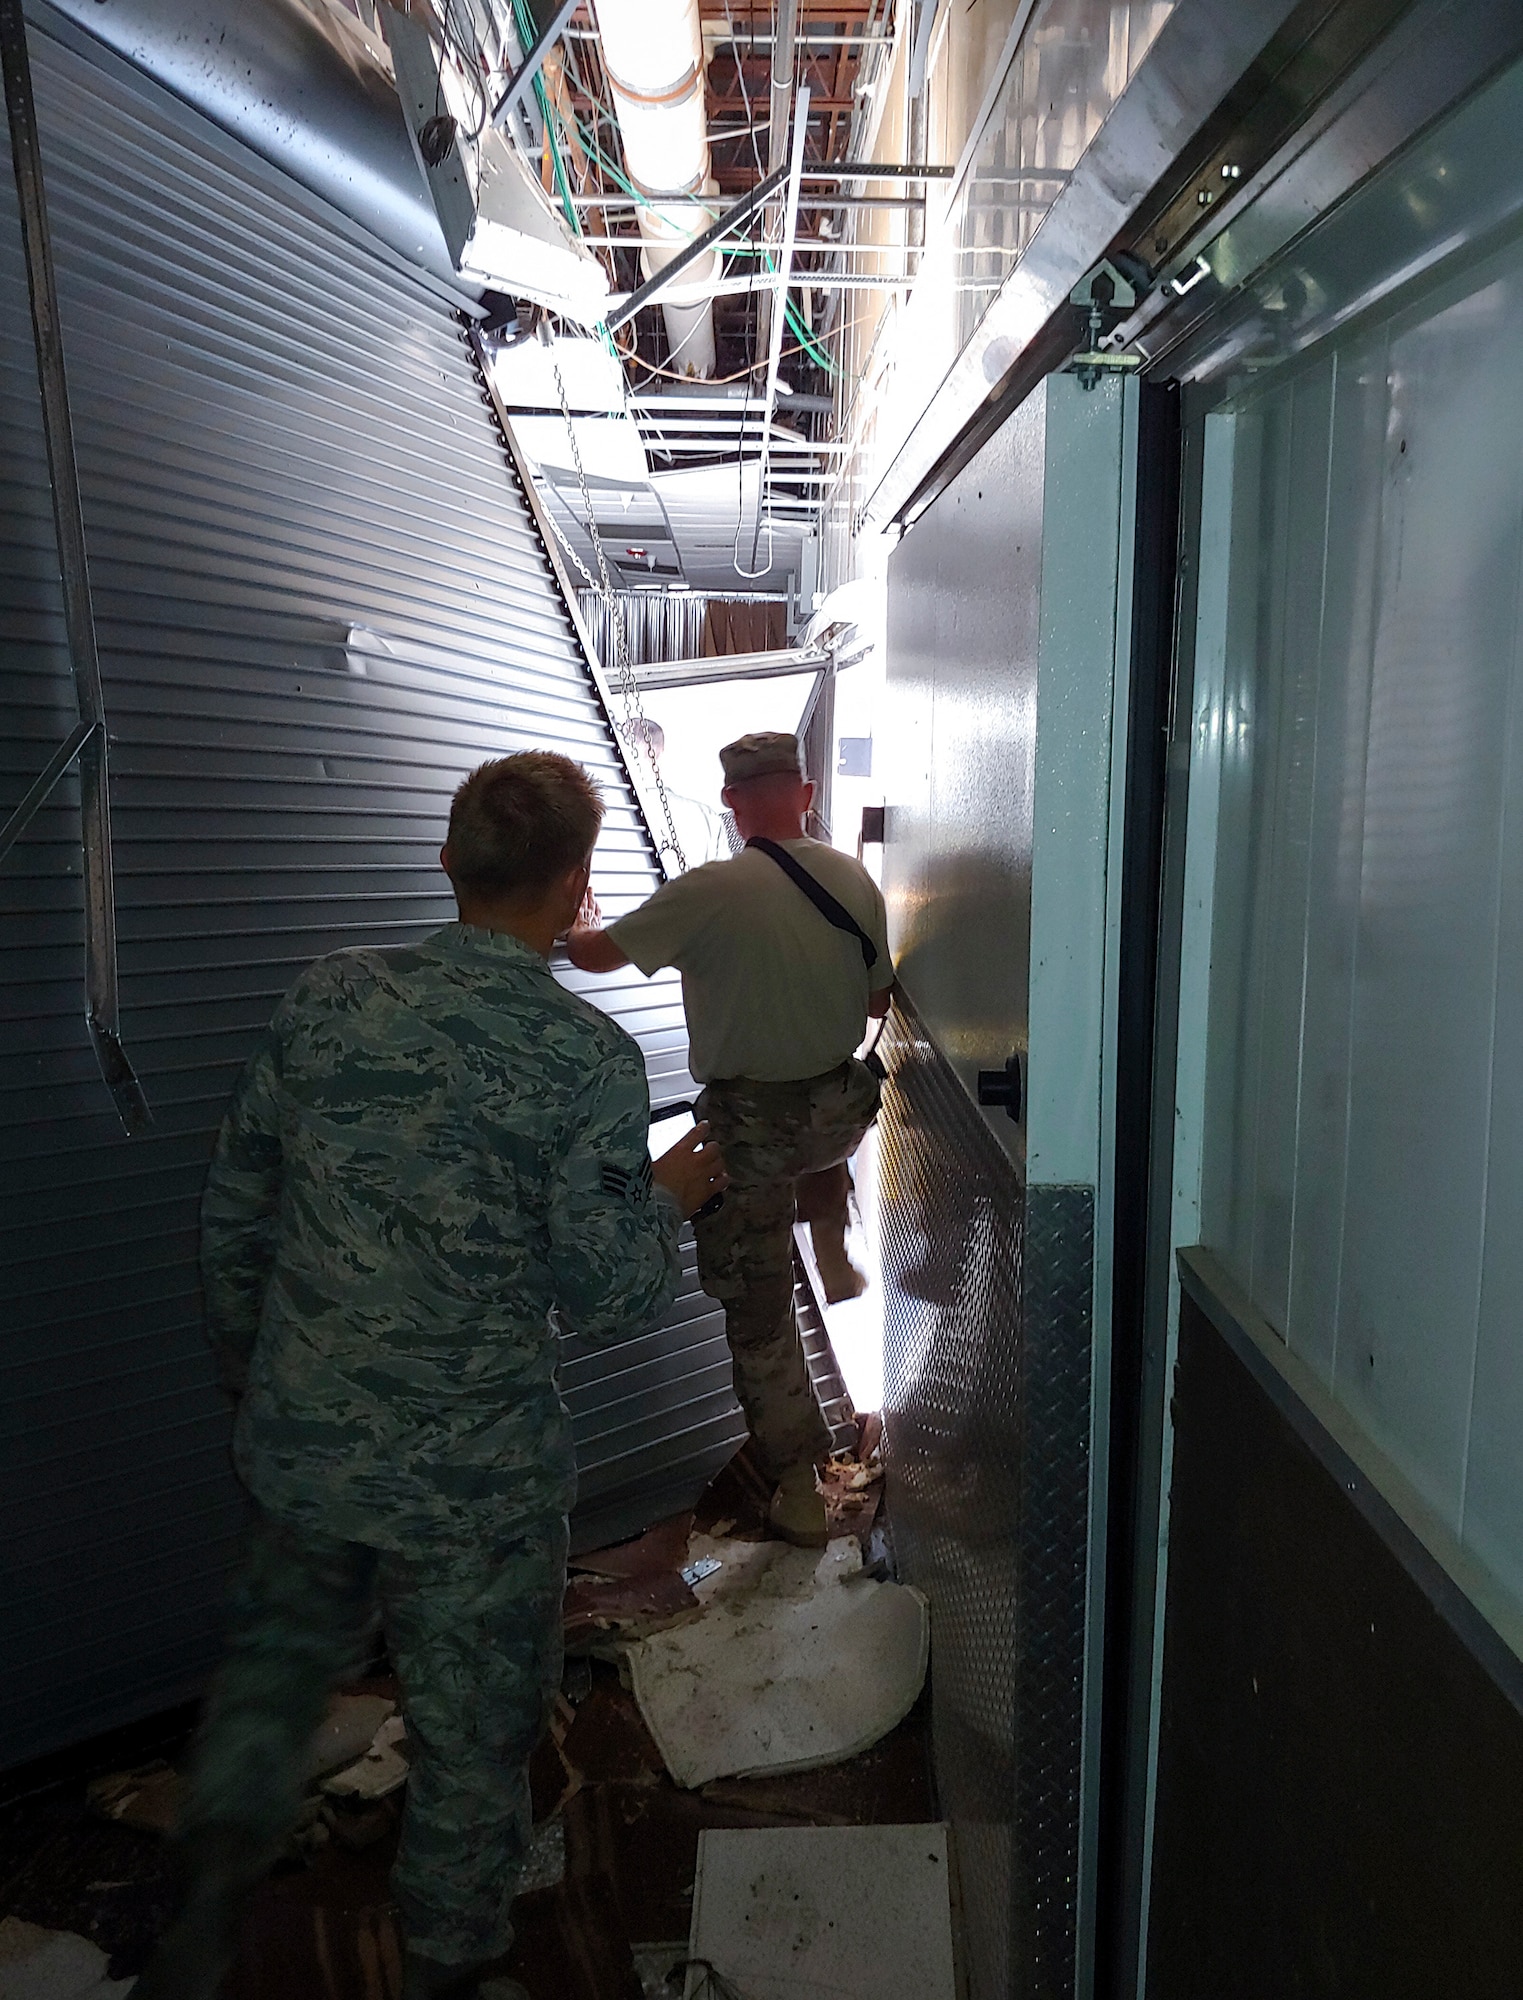 A team from the 96th Medical Group provides aid to Tyndall AFB after Hurricane Michael.